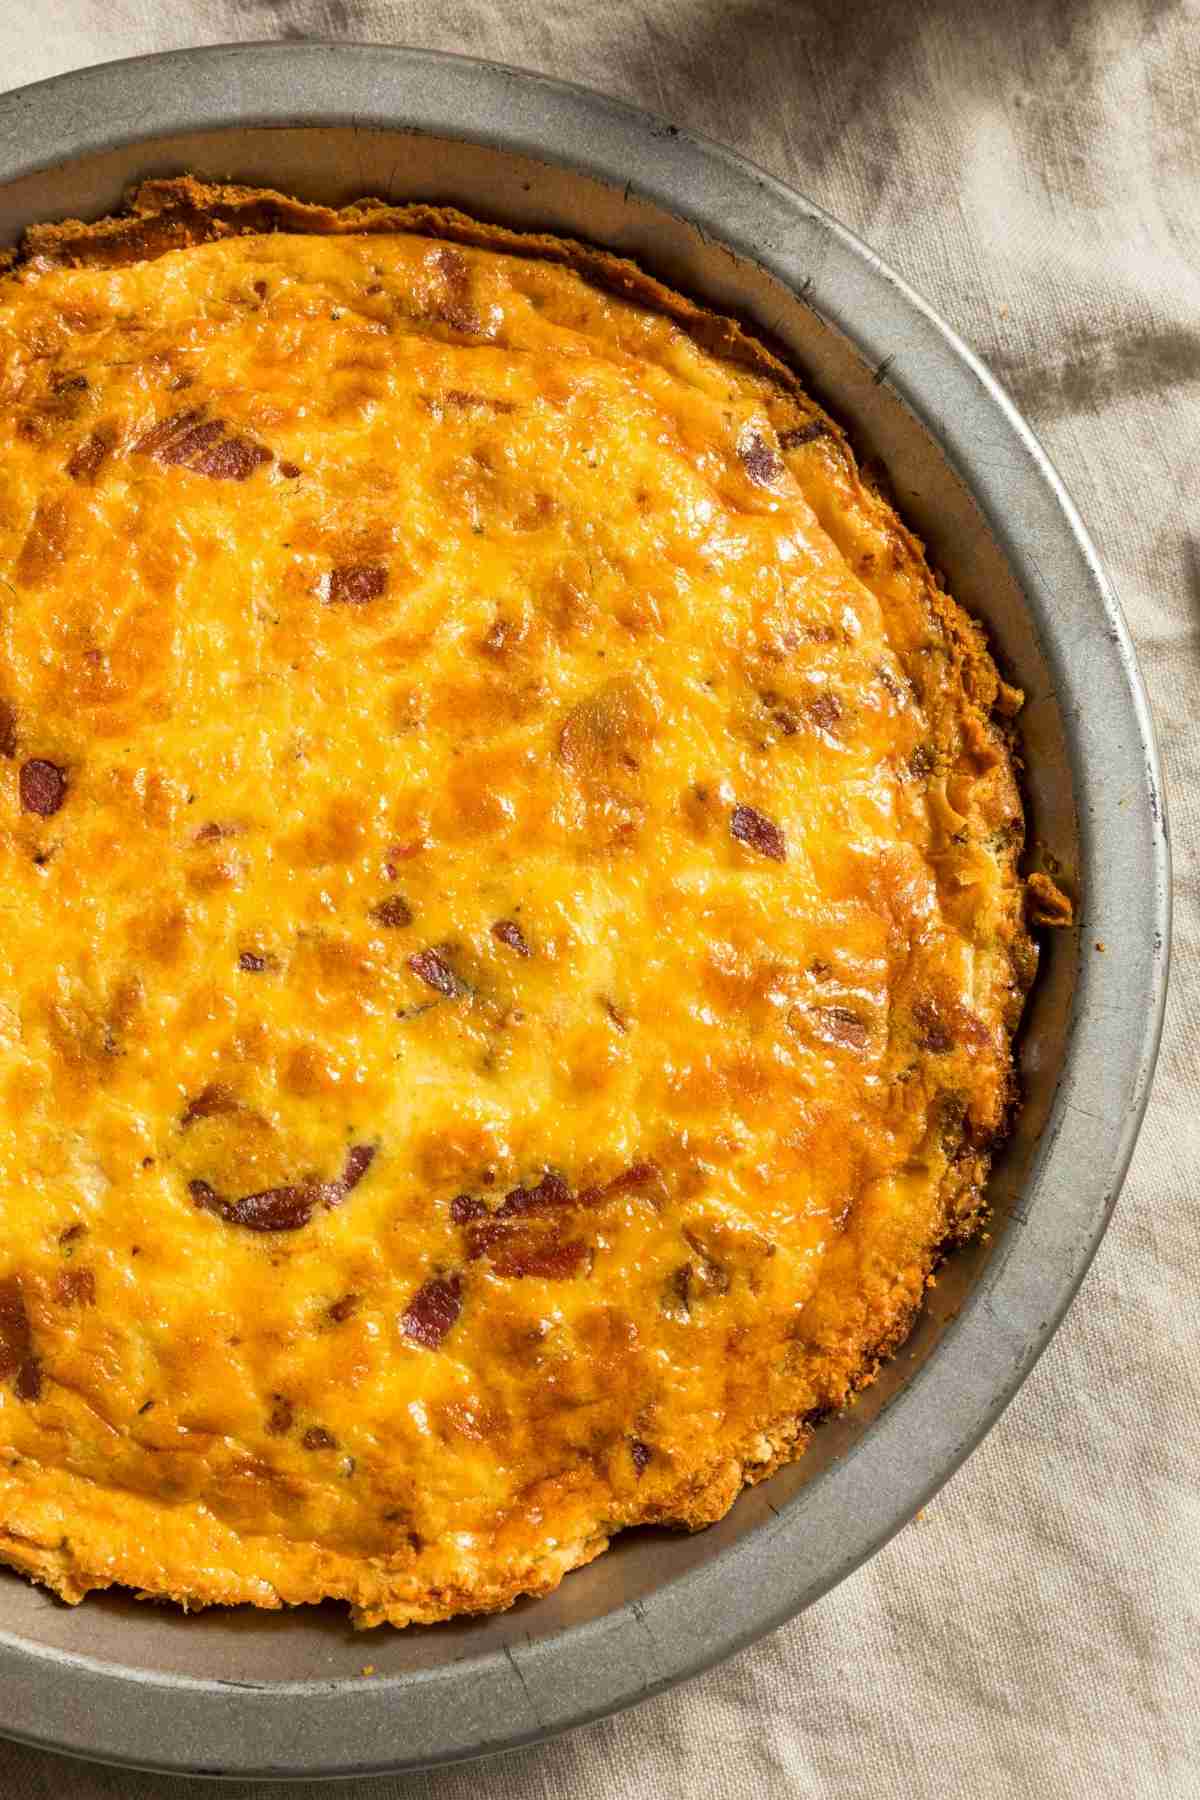 The flavors of Swiss cheese and bacon shine through in this classic quiche recipe, and making it with Bisquick is super easy! You’ll need just a handful of simple ingredients, but it comes out perfectly rich and flavorful every time.